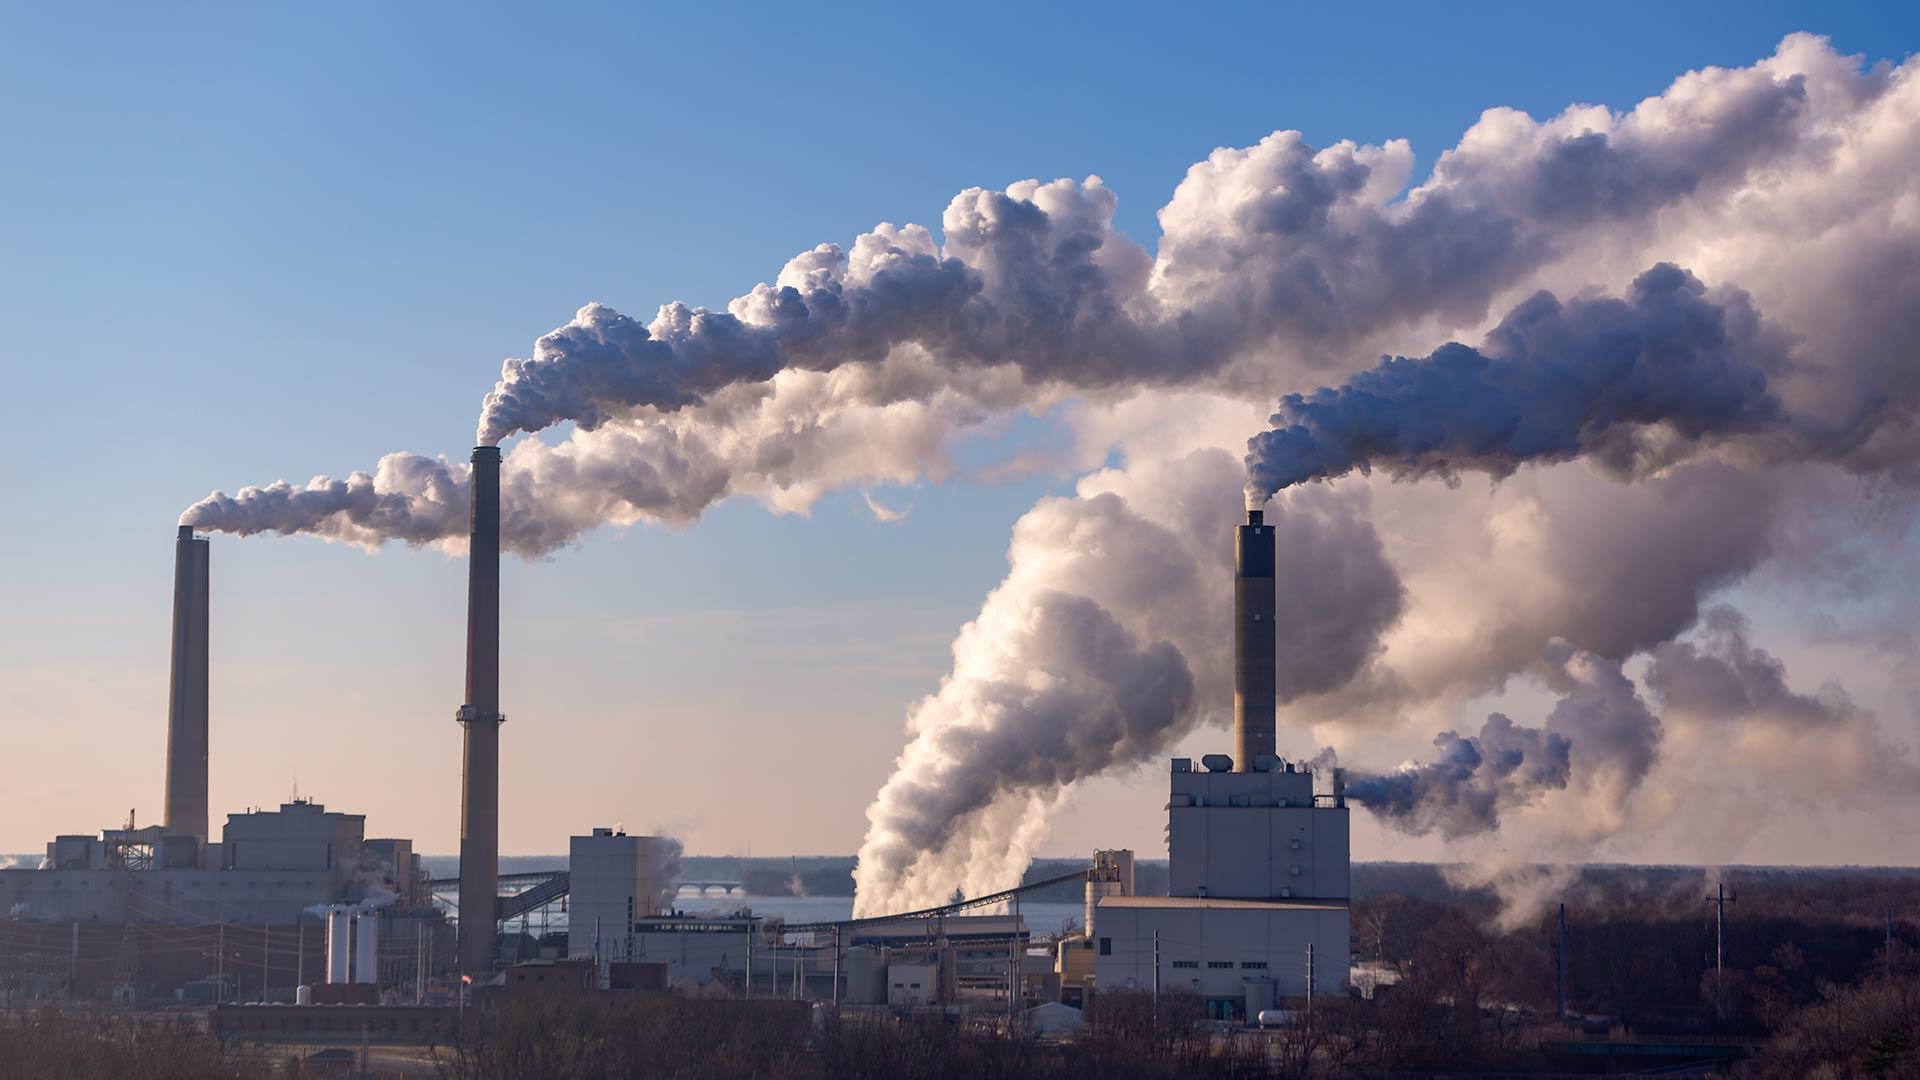 The Inflation Reduction Act expected to pass the House and be signed into law soon is a landmark in legislation to halt climate change as well as to increase environmental justice for communities living near pollution sources, a UMD researcher says. Photo by iStock.